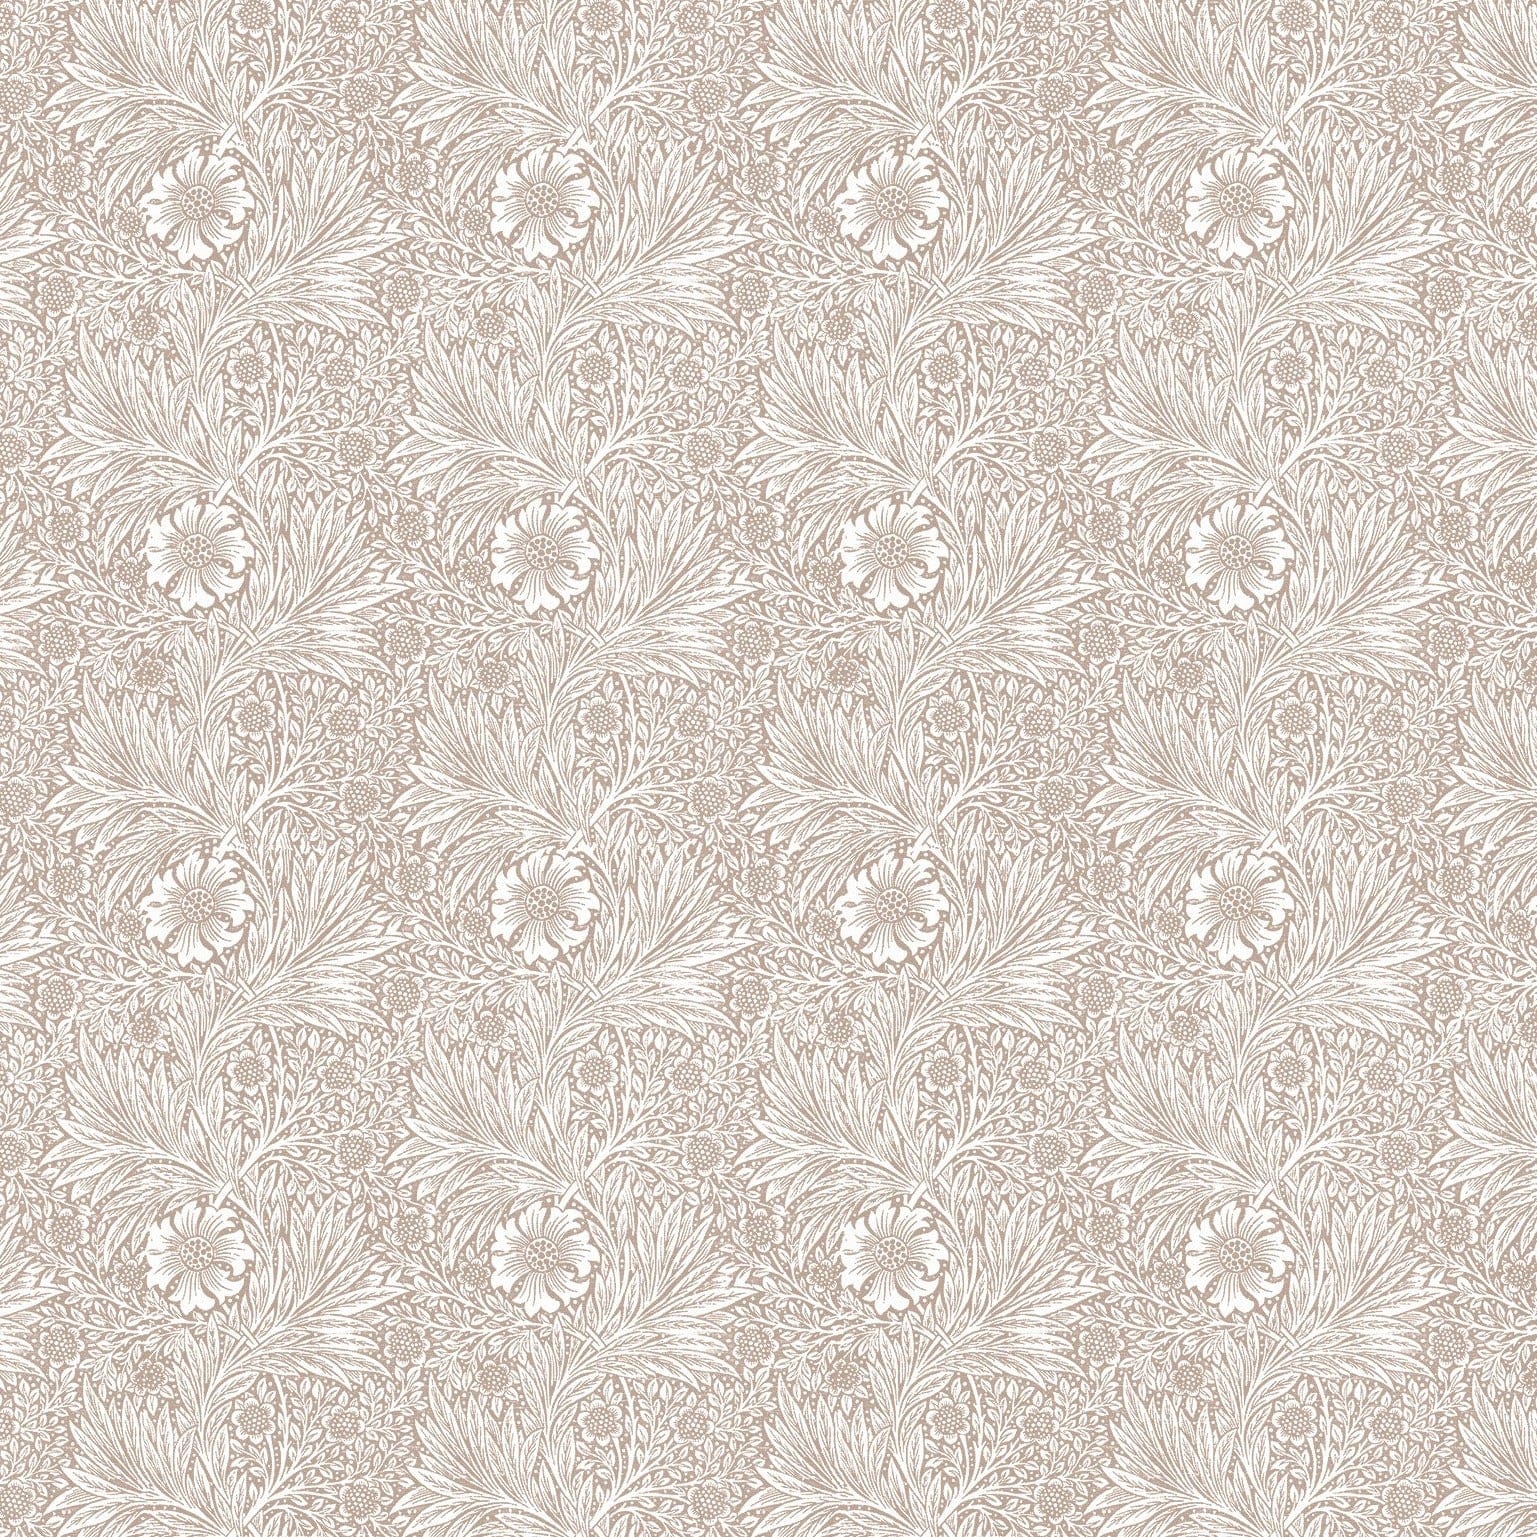 Close-up of the Timeless Floral Wallpaper with detailed beige floral patterns, offering a textured and elegant wall covering option.